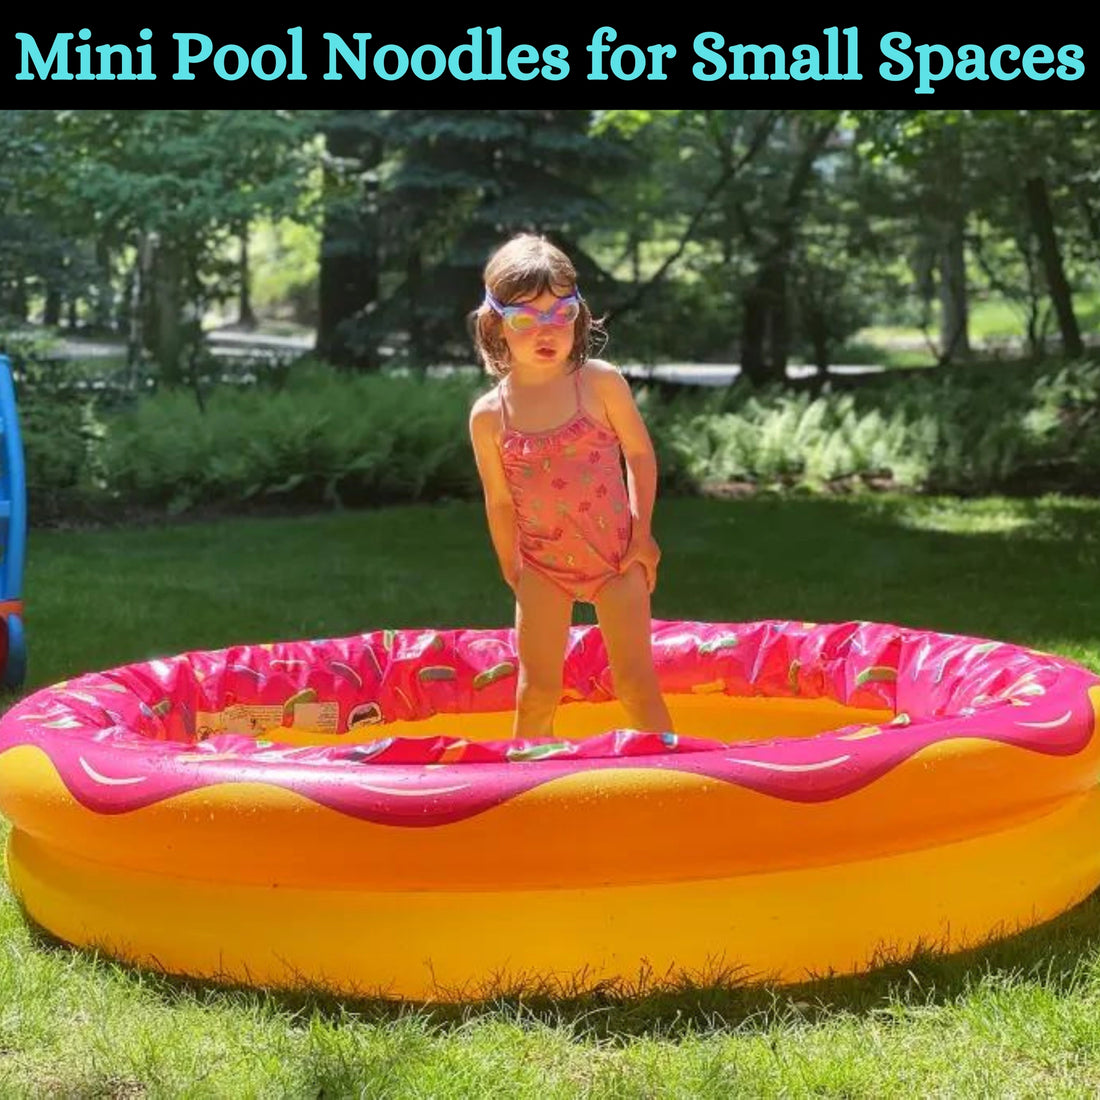 Mini Pool Noodles for Small Spaces